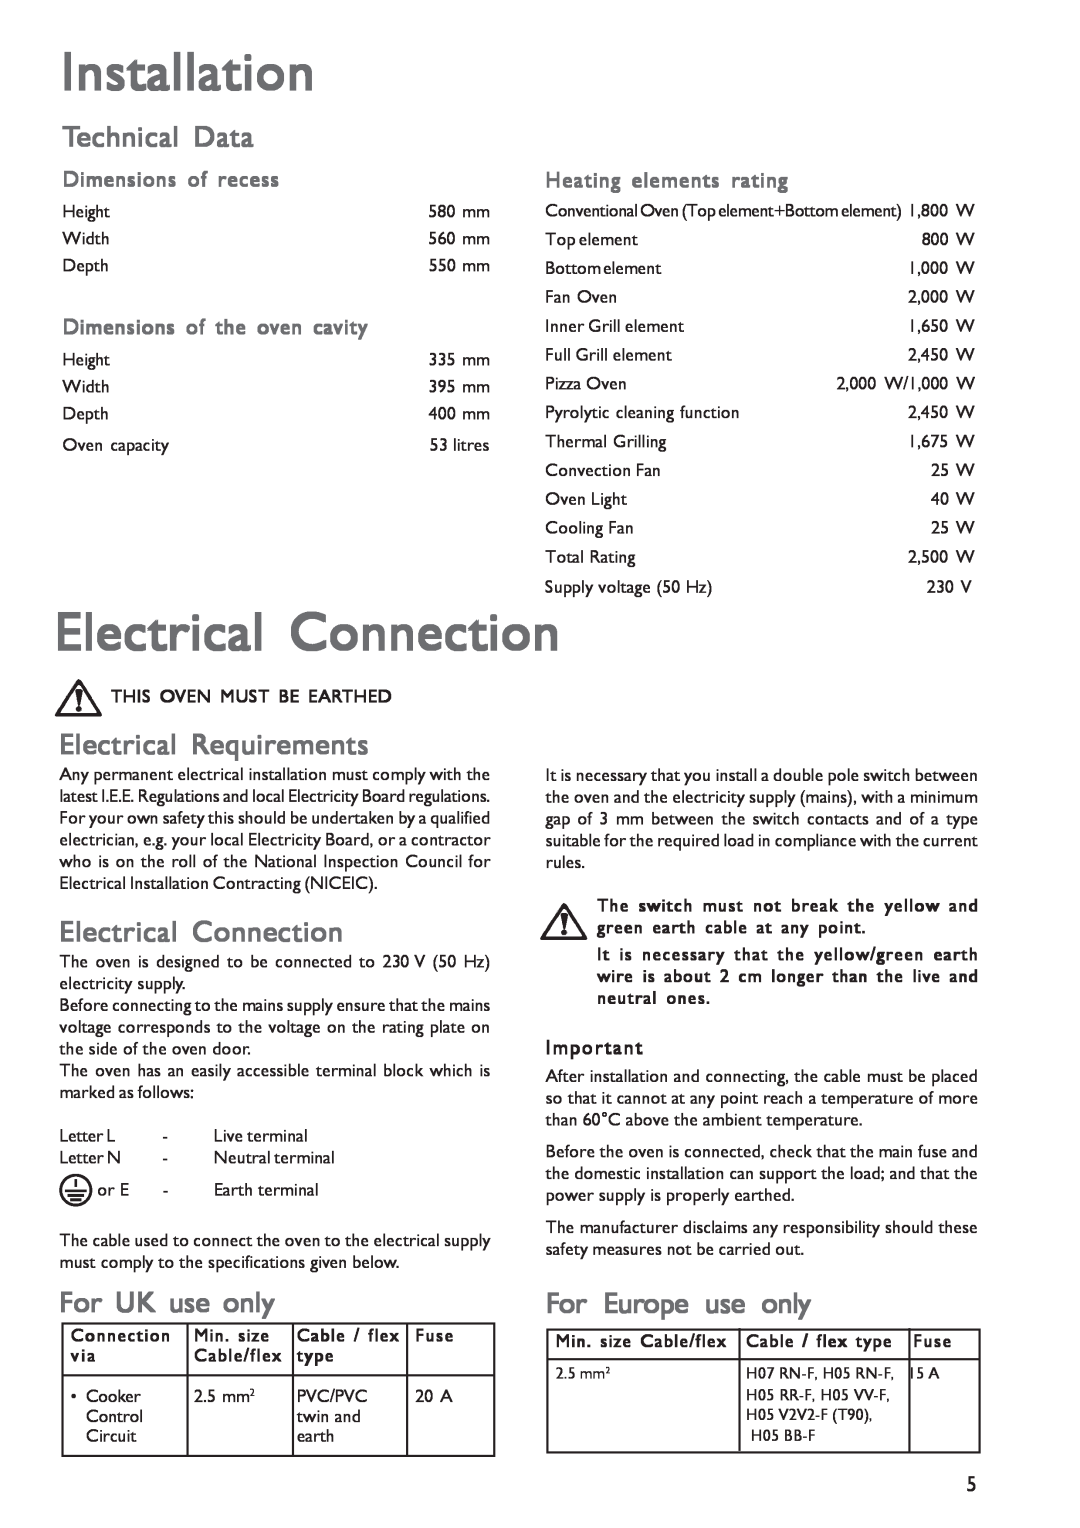 John Lewis JLBIOS603 Installation, Electrical Connection, Technical Data, Electrical Requirements, For UK use only 